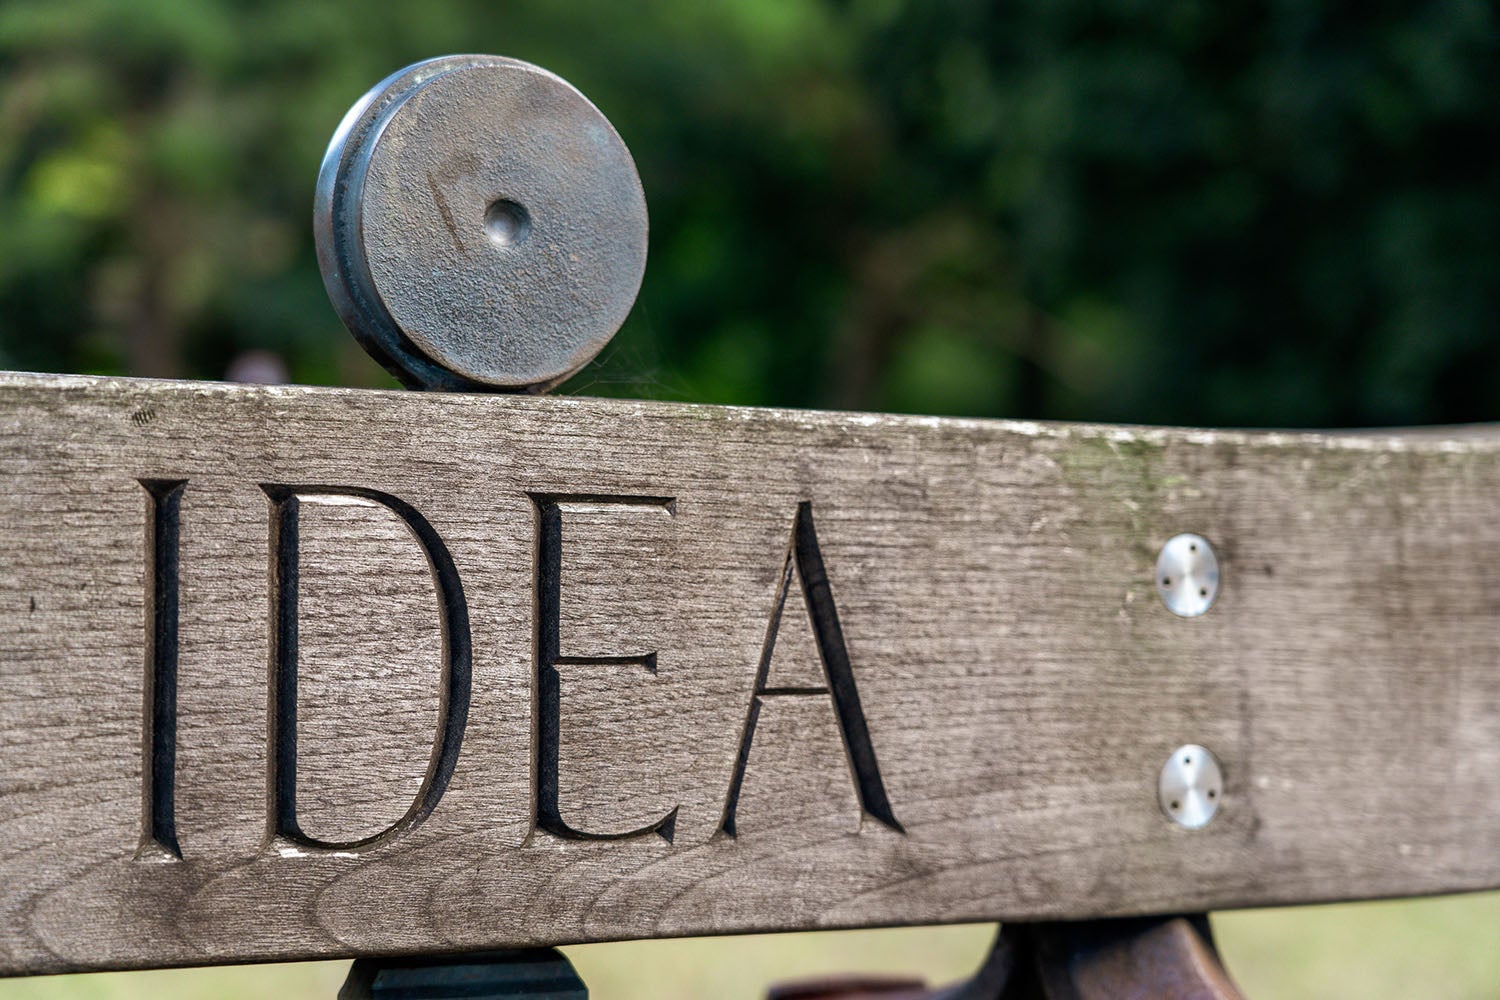 Wooden fence plank that says "idea"